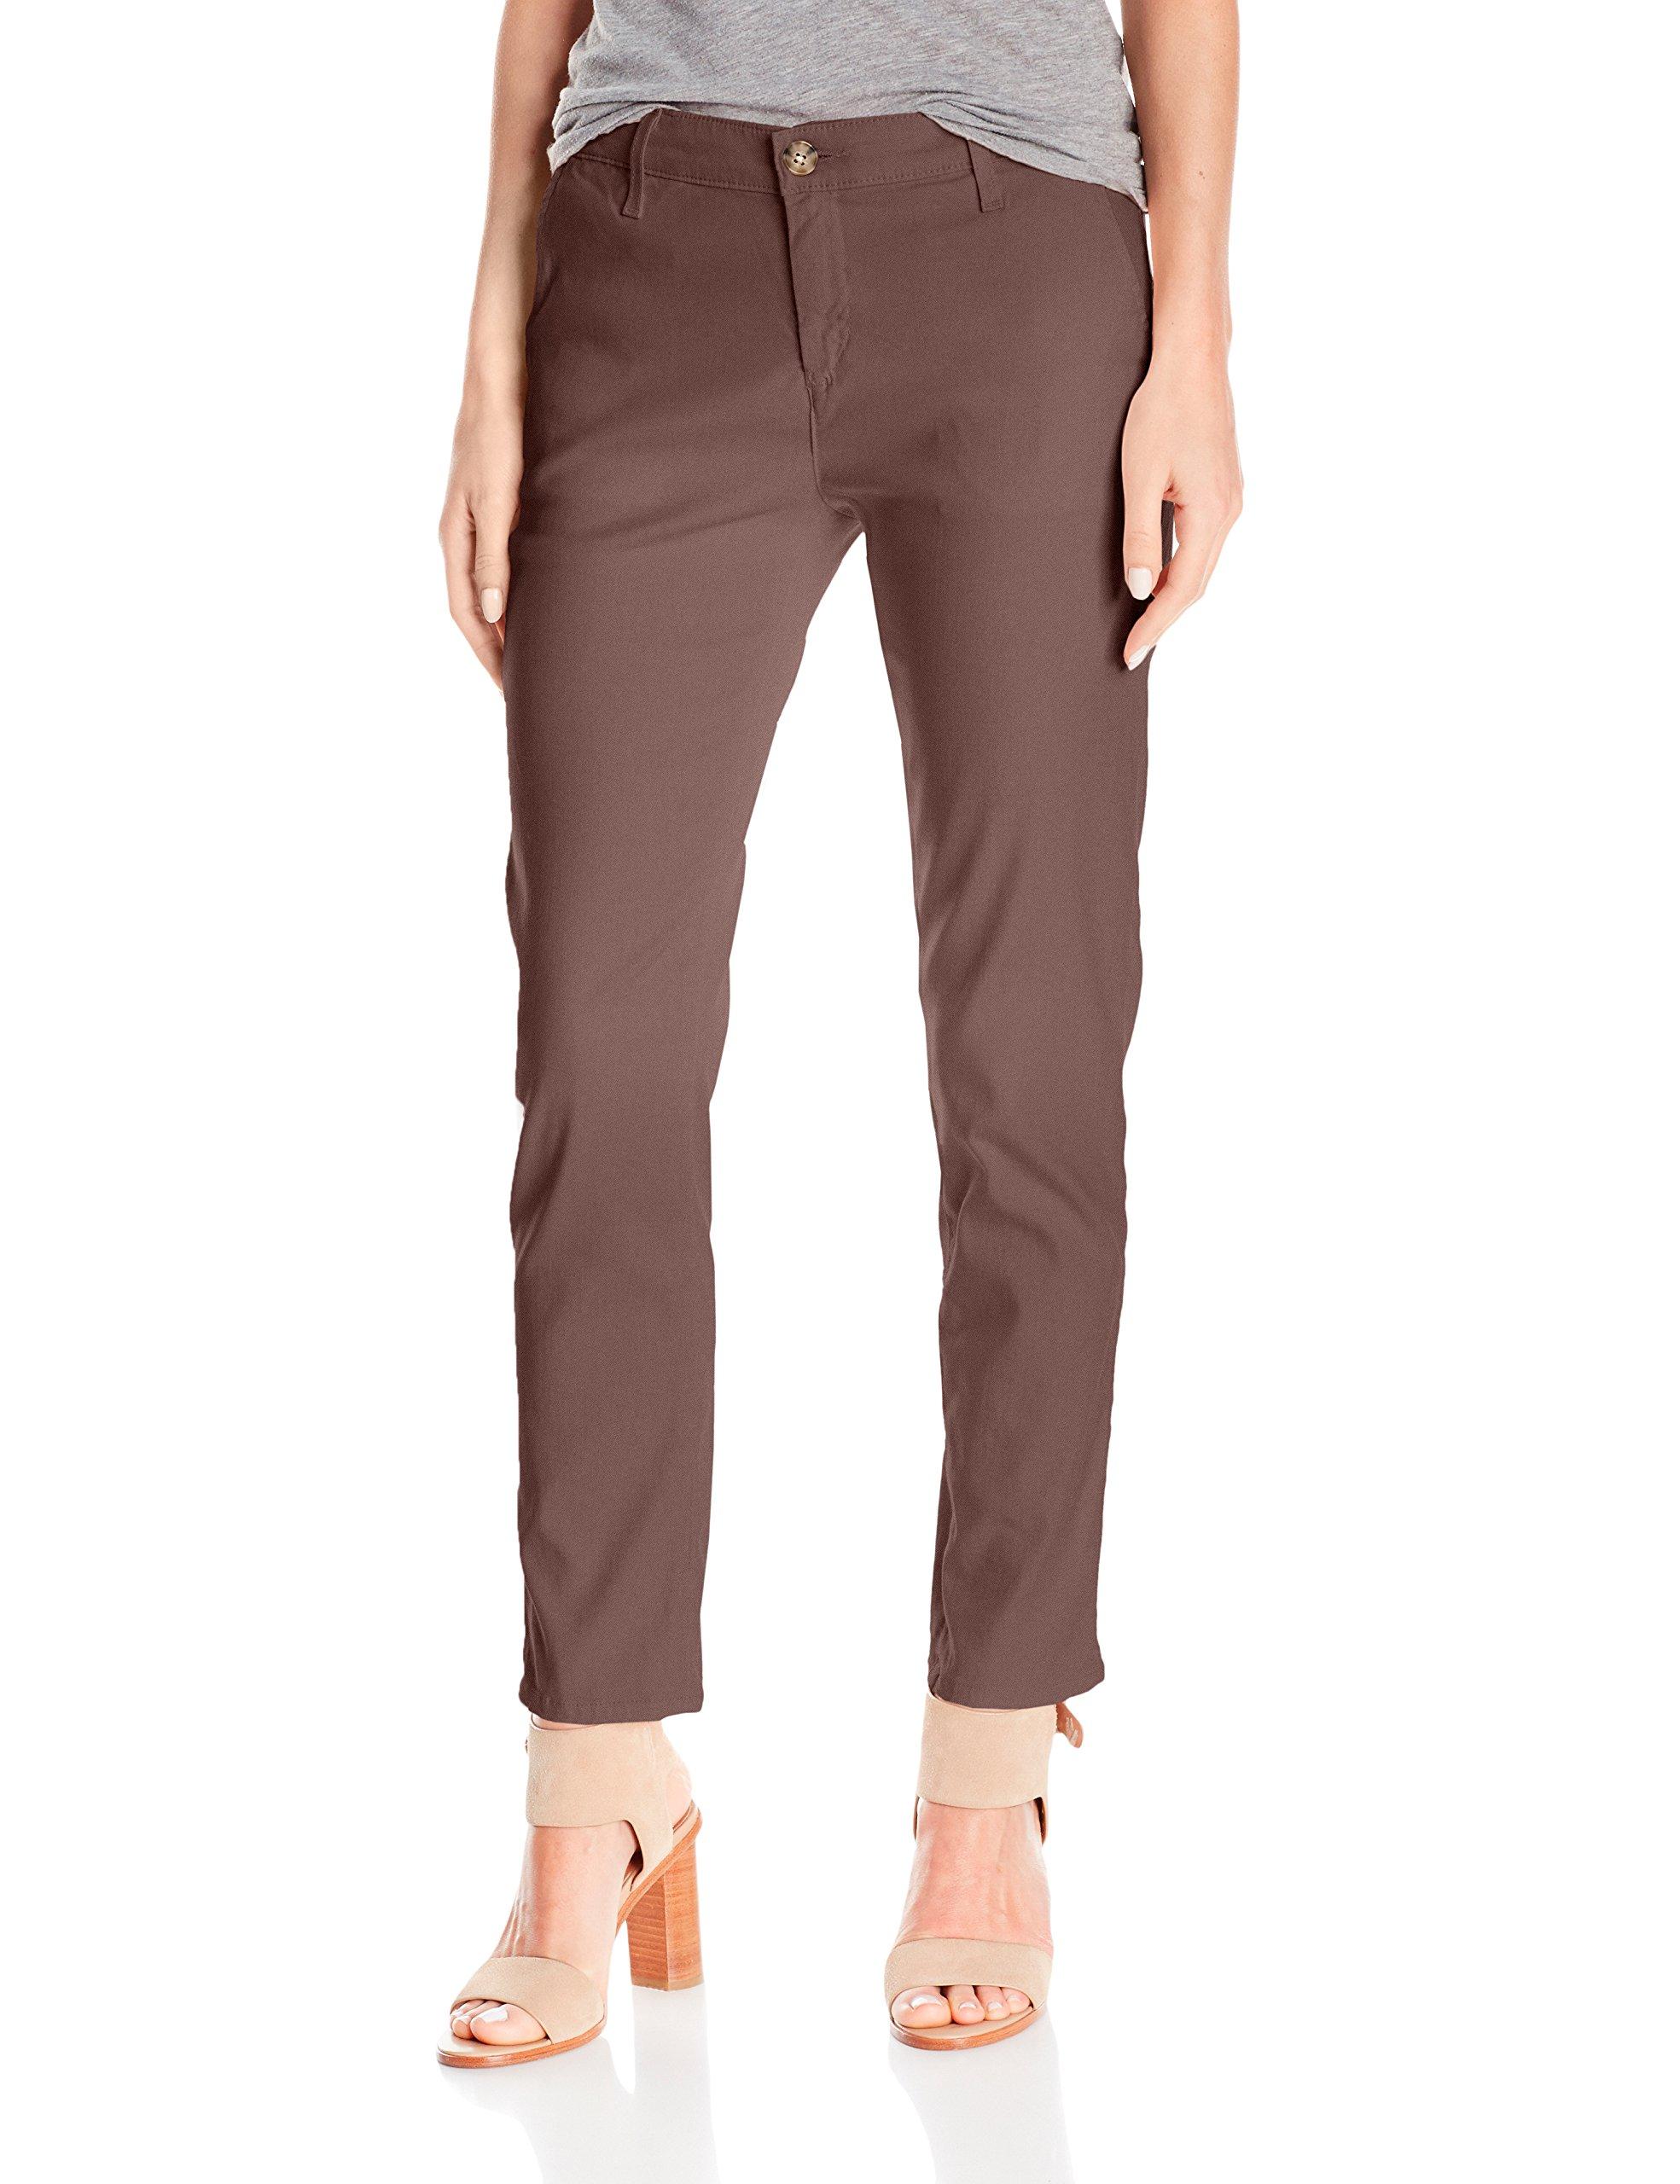 AG Jeans Caden Tailored Trouser - Save 17% - Lyst